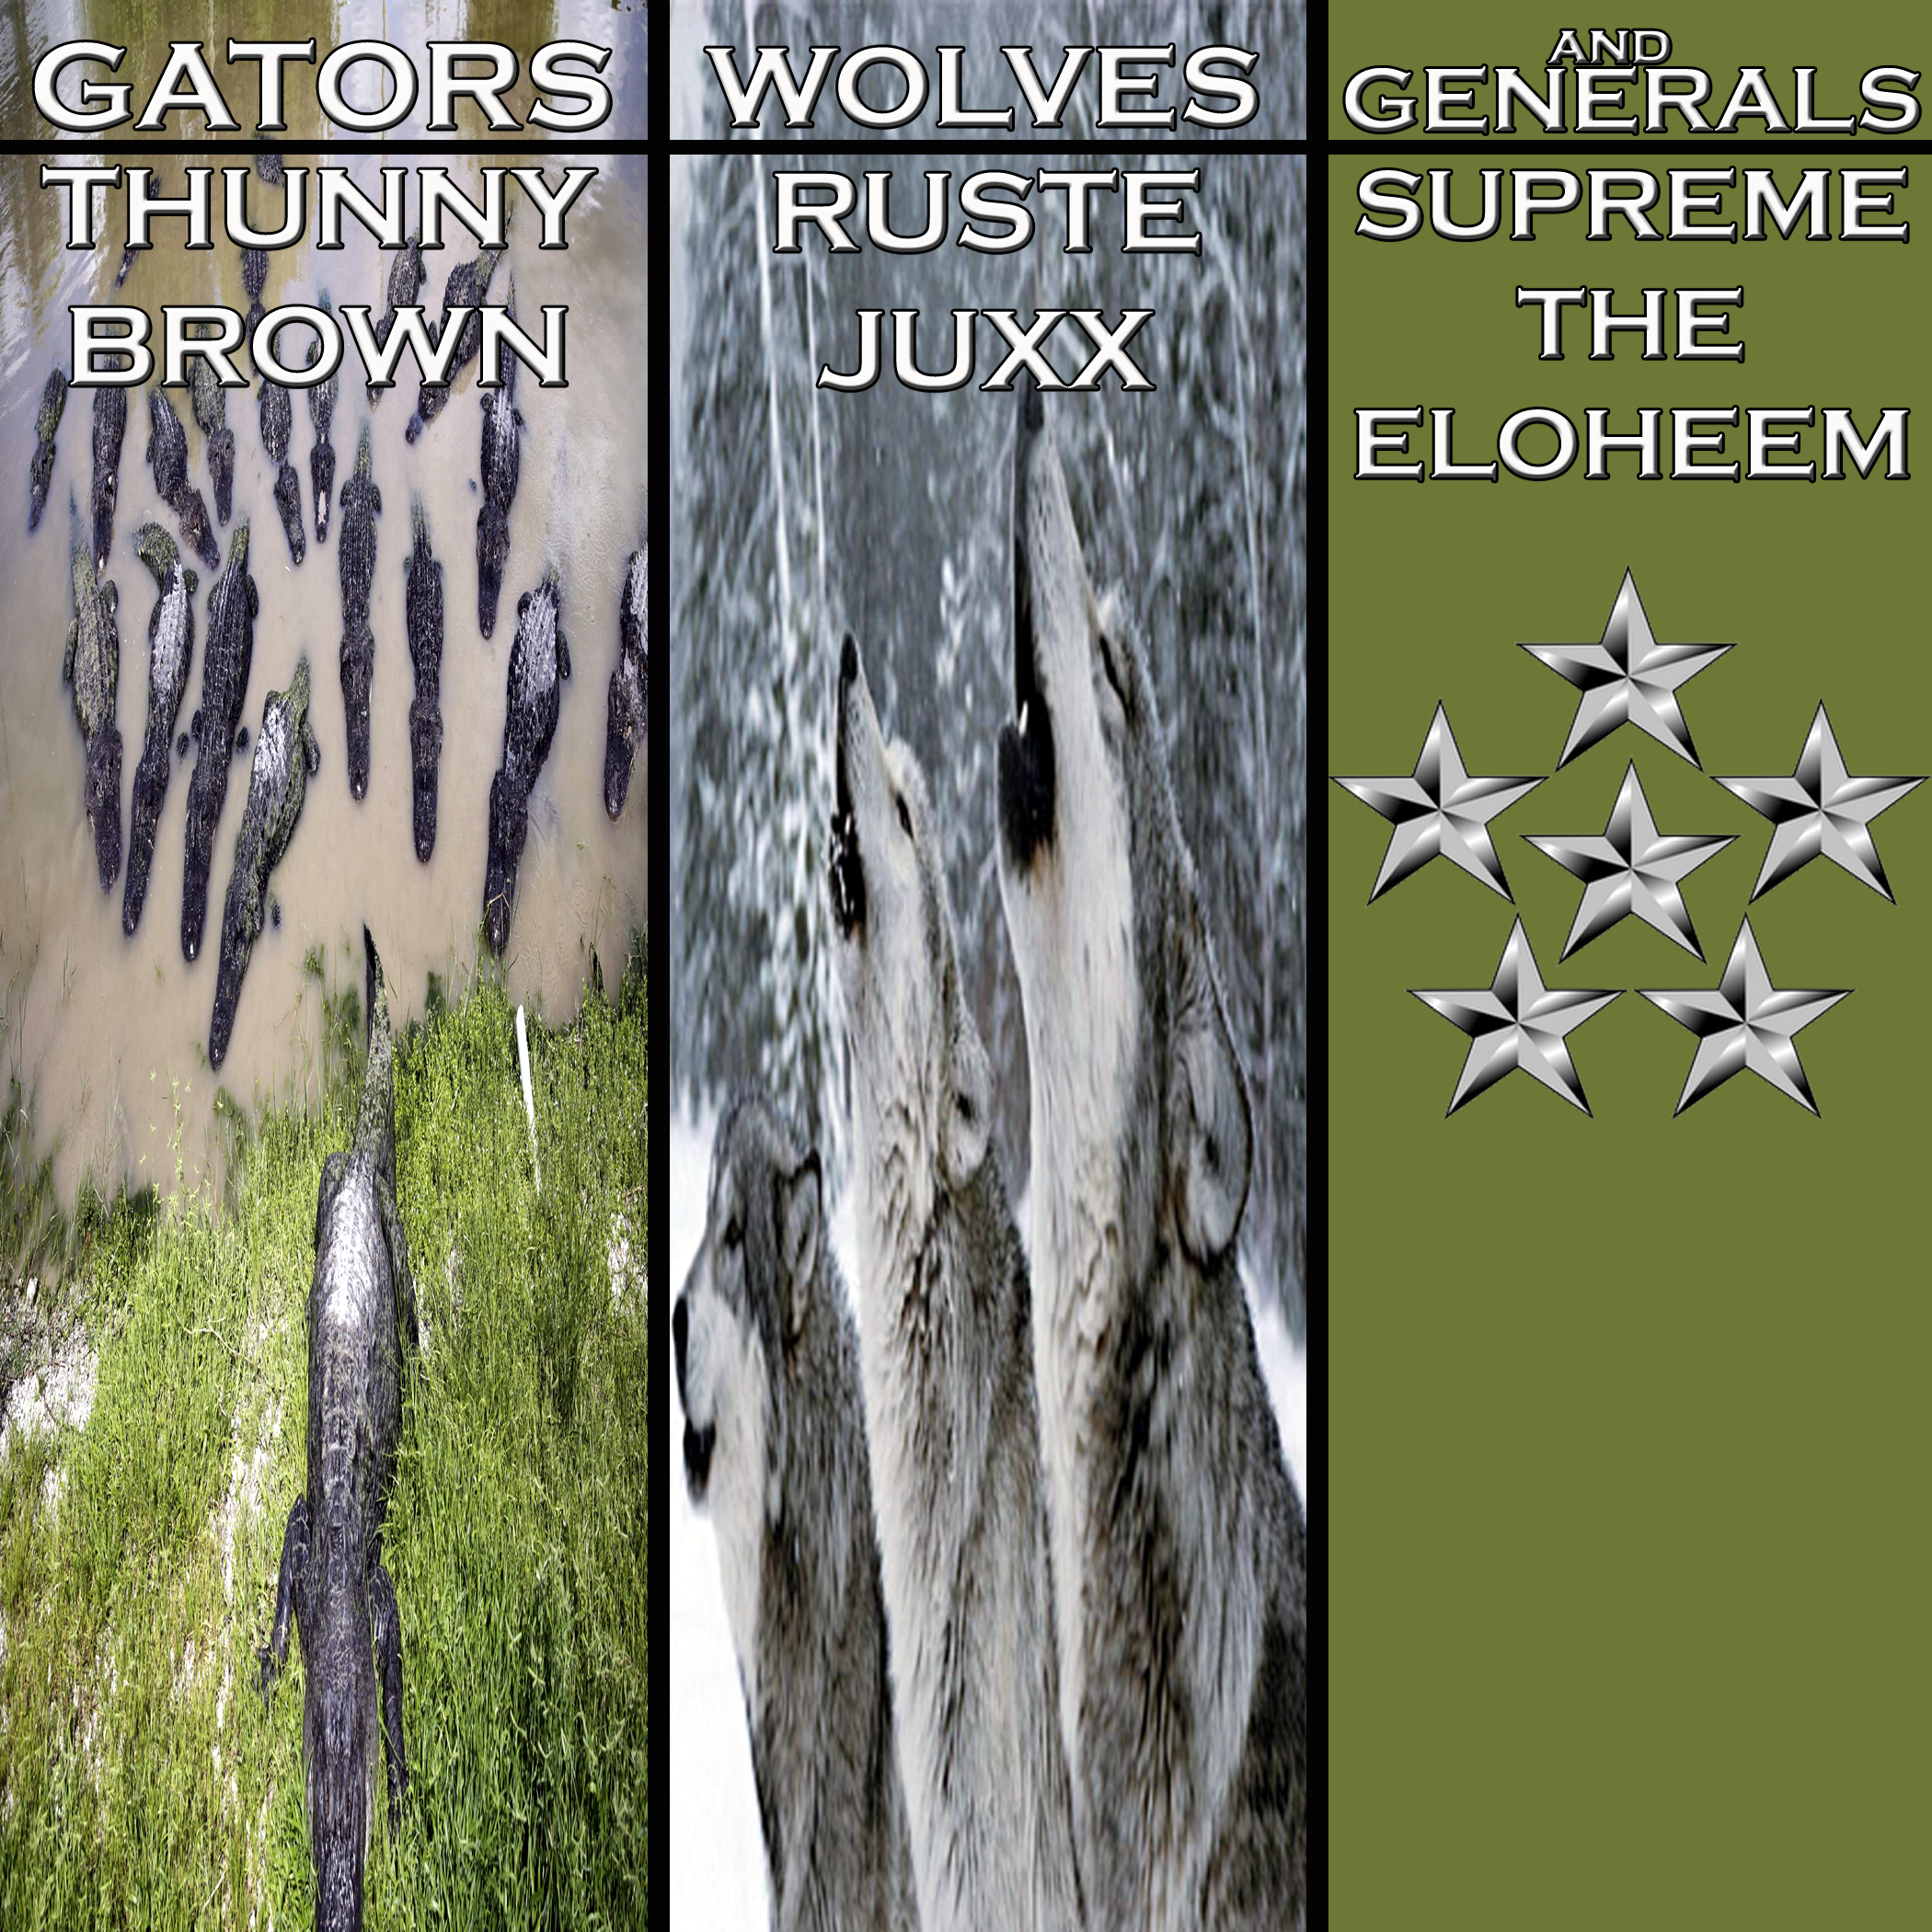 Art for Gators, Wolves and Generals by THUNNY BROWN ft RUSTE JUXX and SUPREME THE ELOHEEM